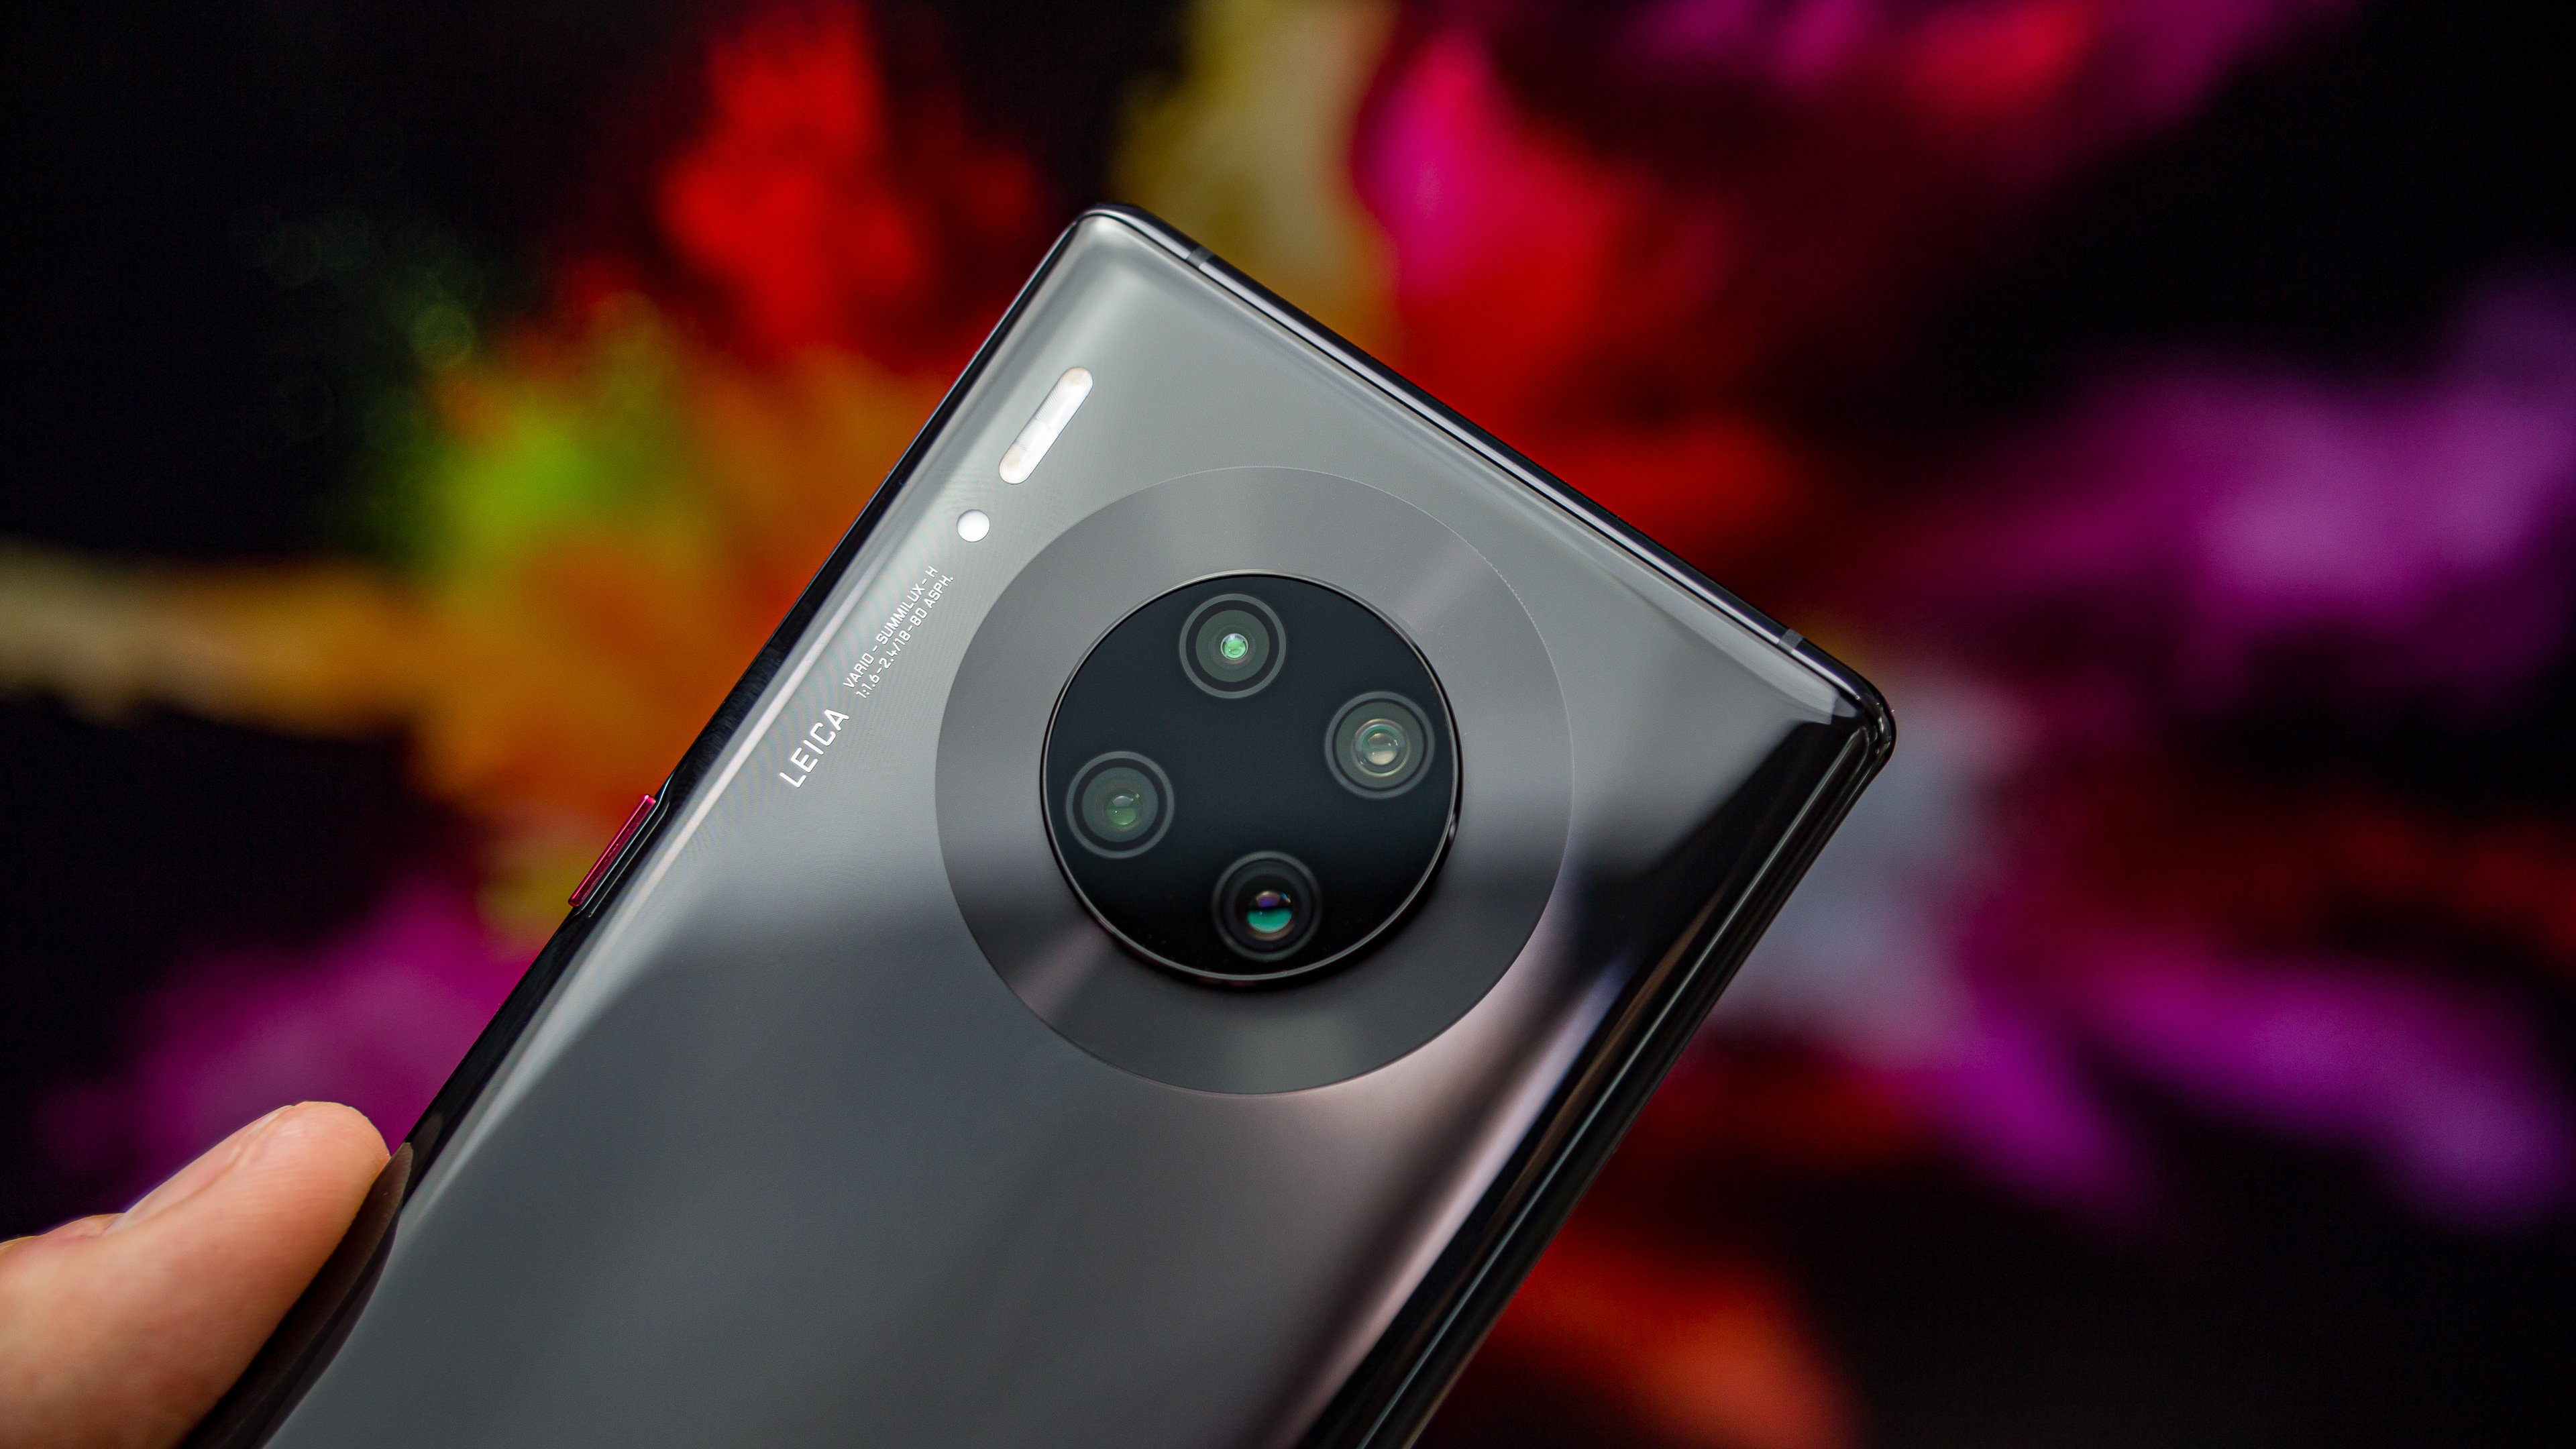 5 Things You'll Definitely Love About The HUAWEI Mate 30 Pro